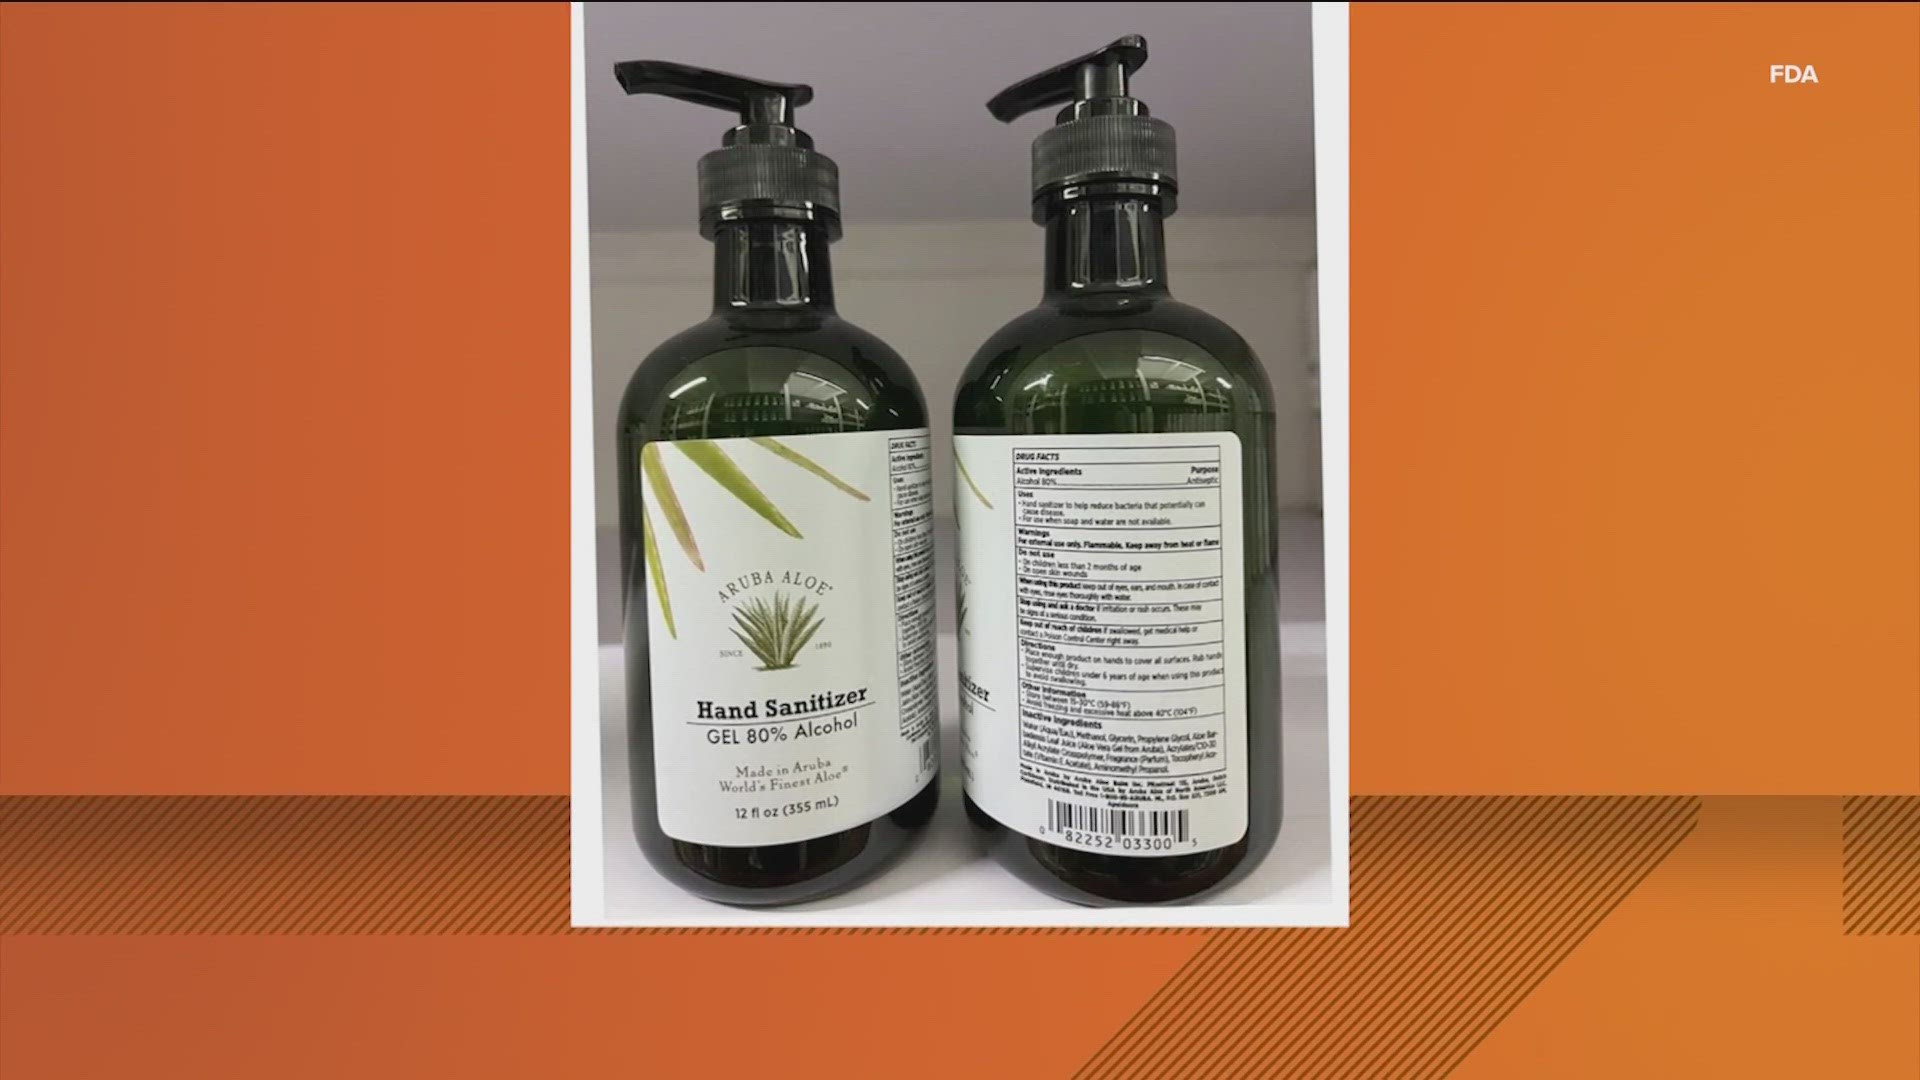 Aruba Aloe hand sanitizer gel was recalled due to it containing chemicals harmful enough to cause a number of serious incidents. Watch the video to learn more.